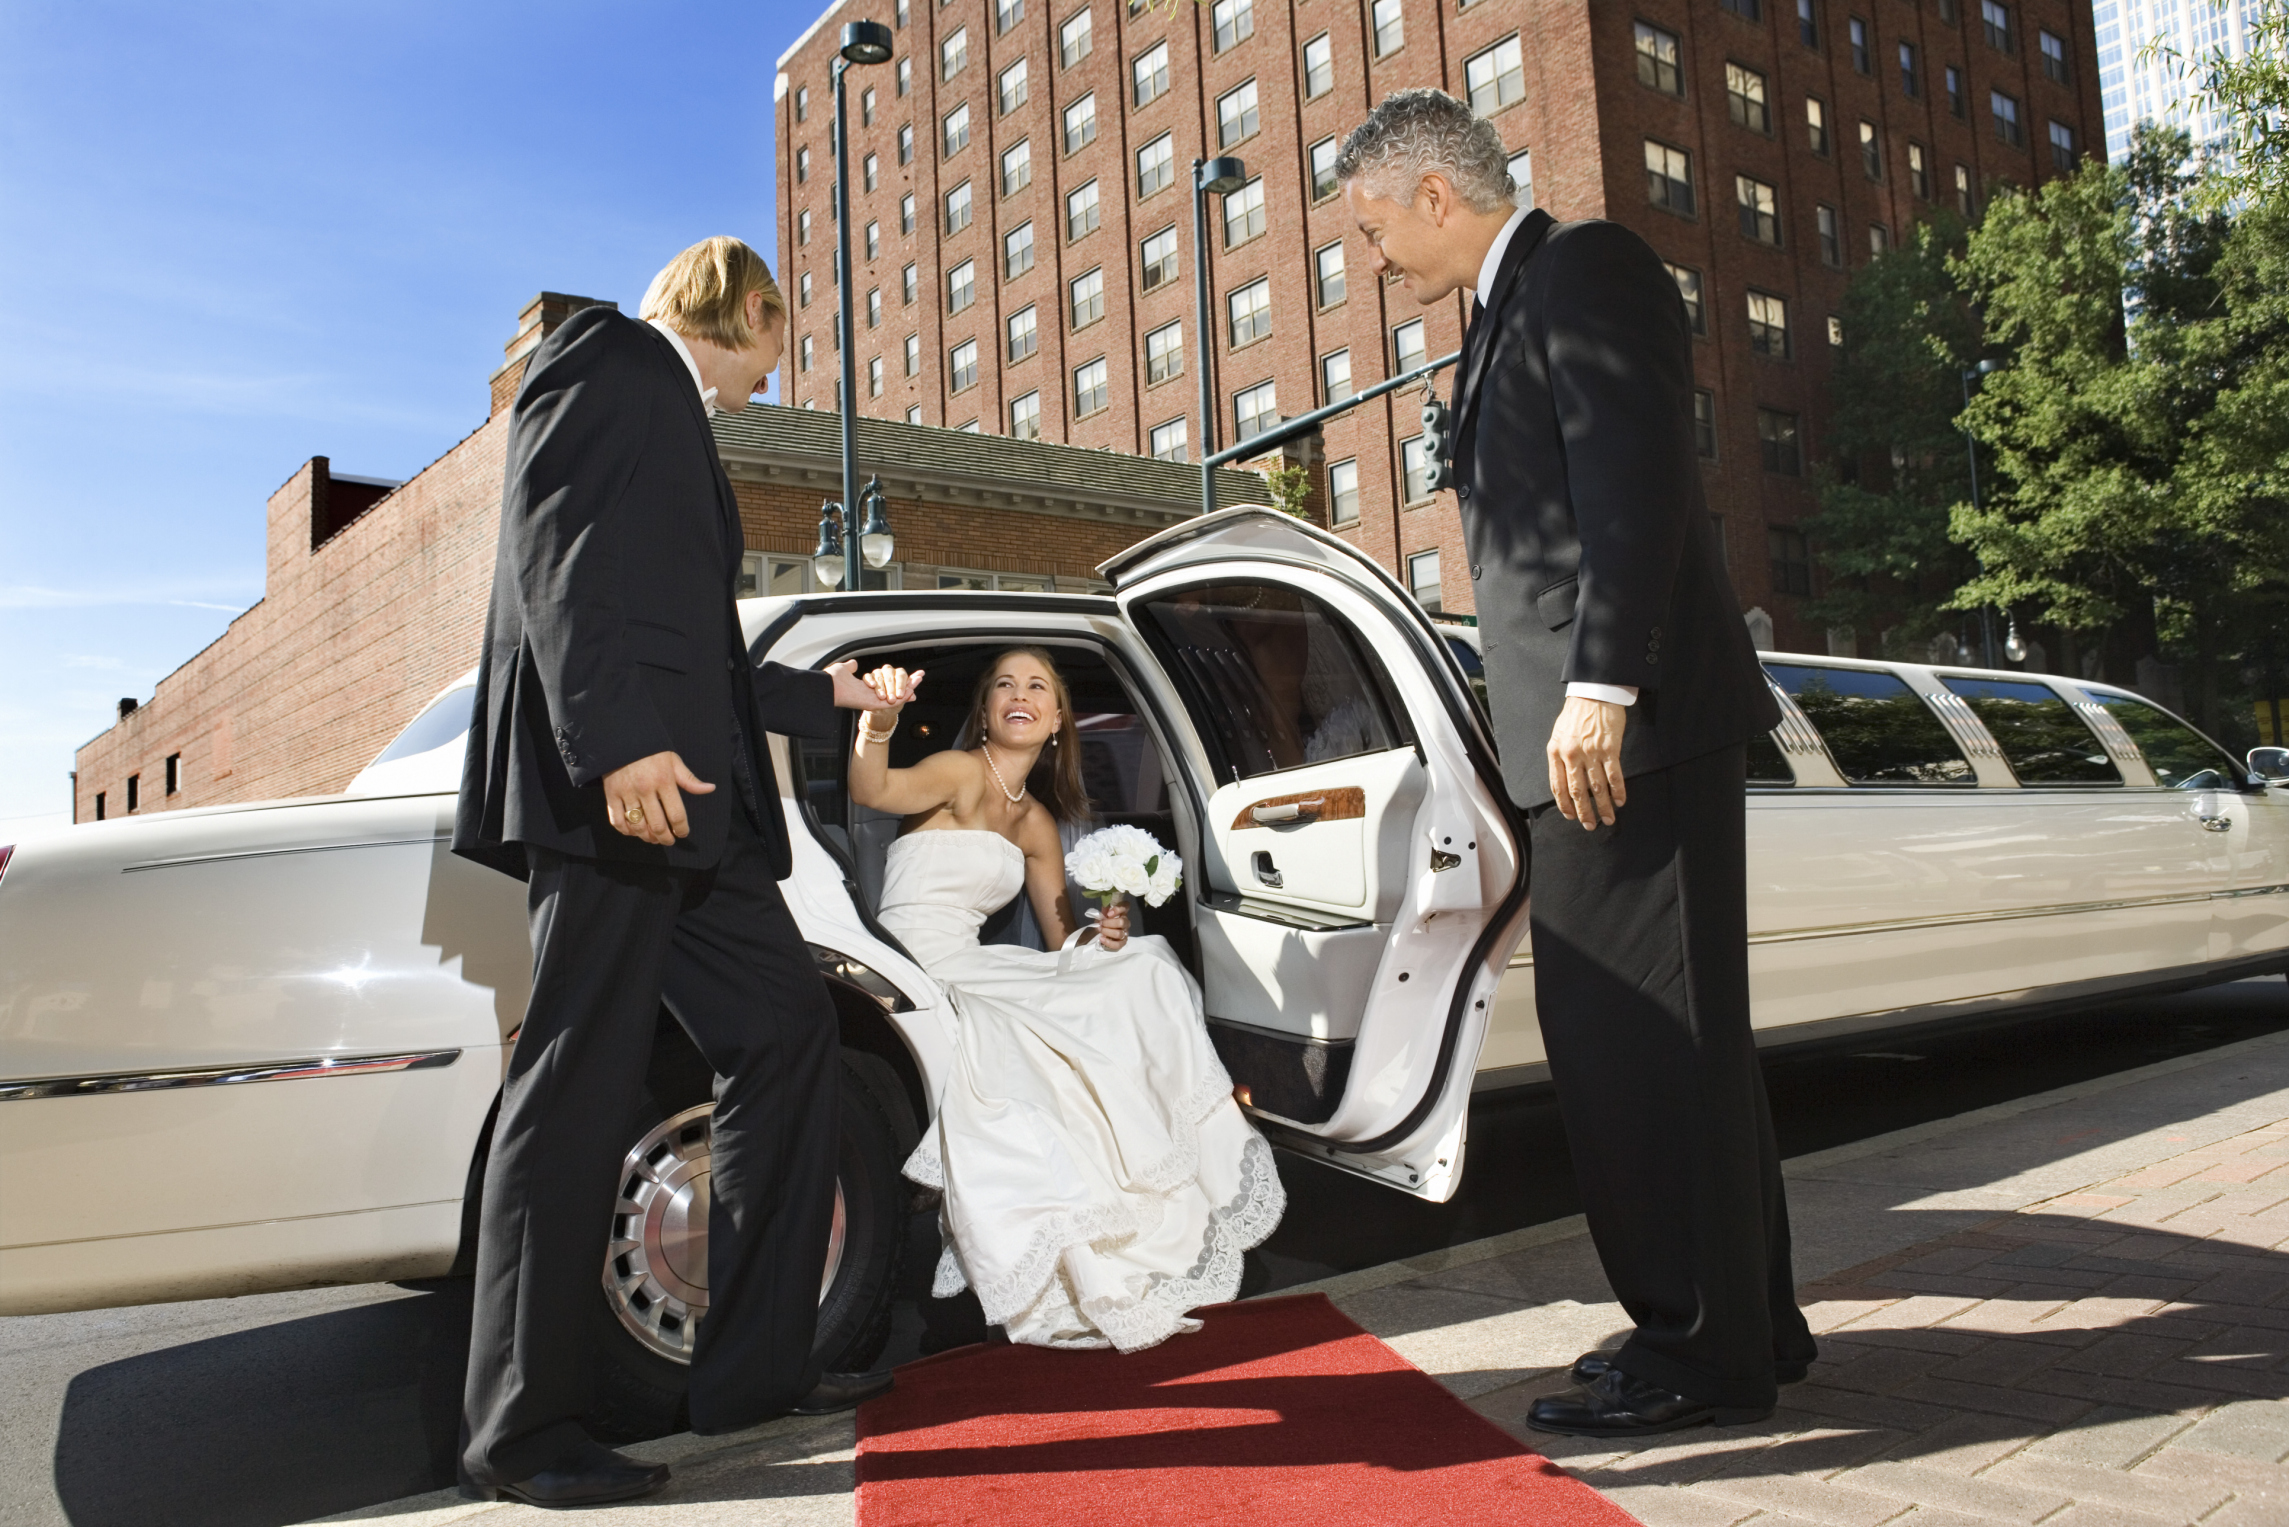 Hudson Valley Wedding Limo Services Art Limos Limousine And Car Service Serving The Hudson